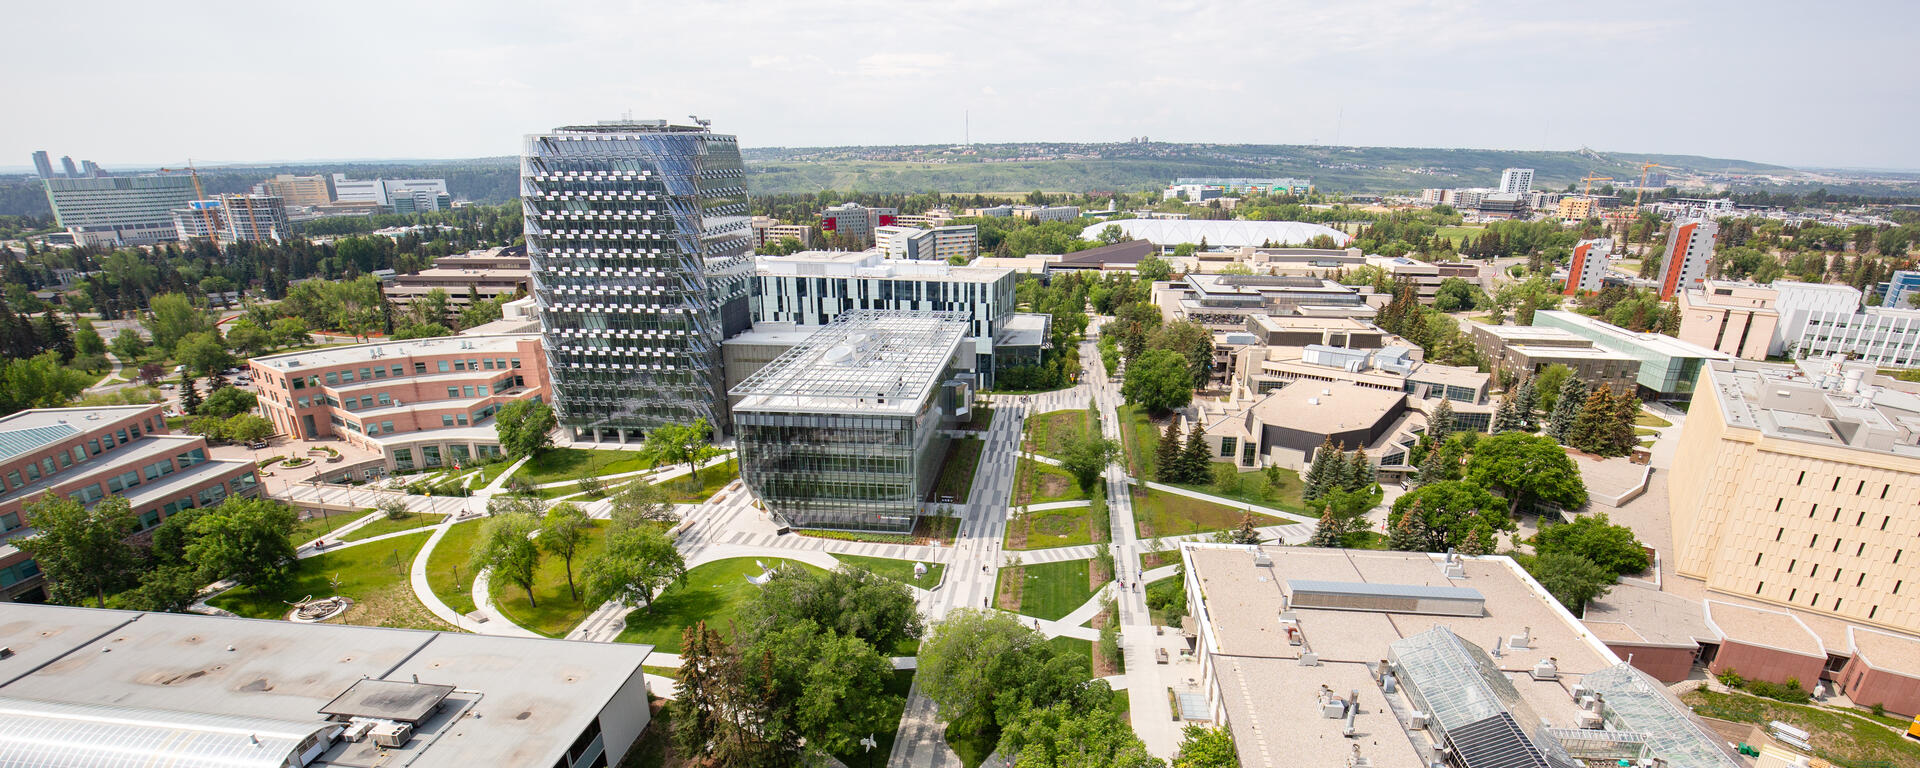 Aerial view of the University of Calgary campus during the summer.